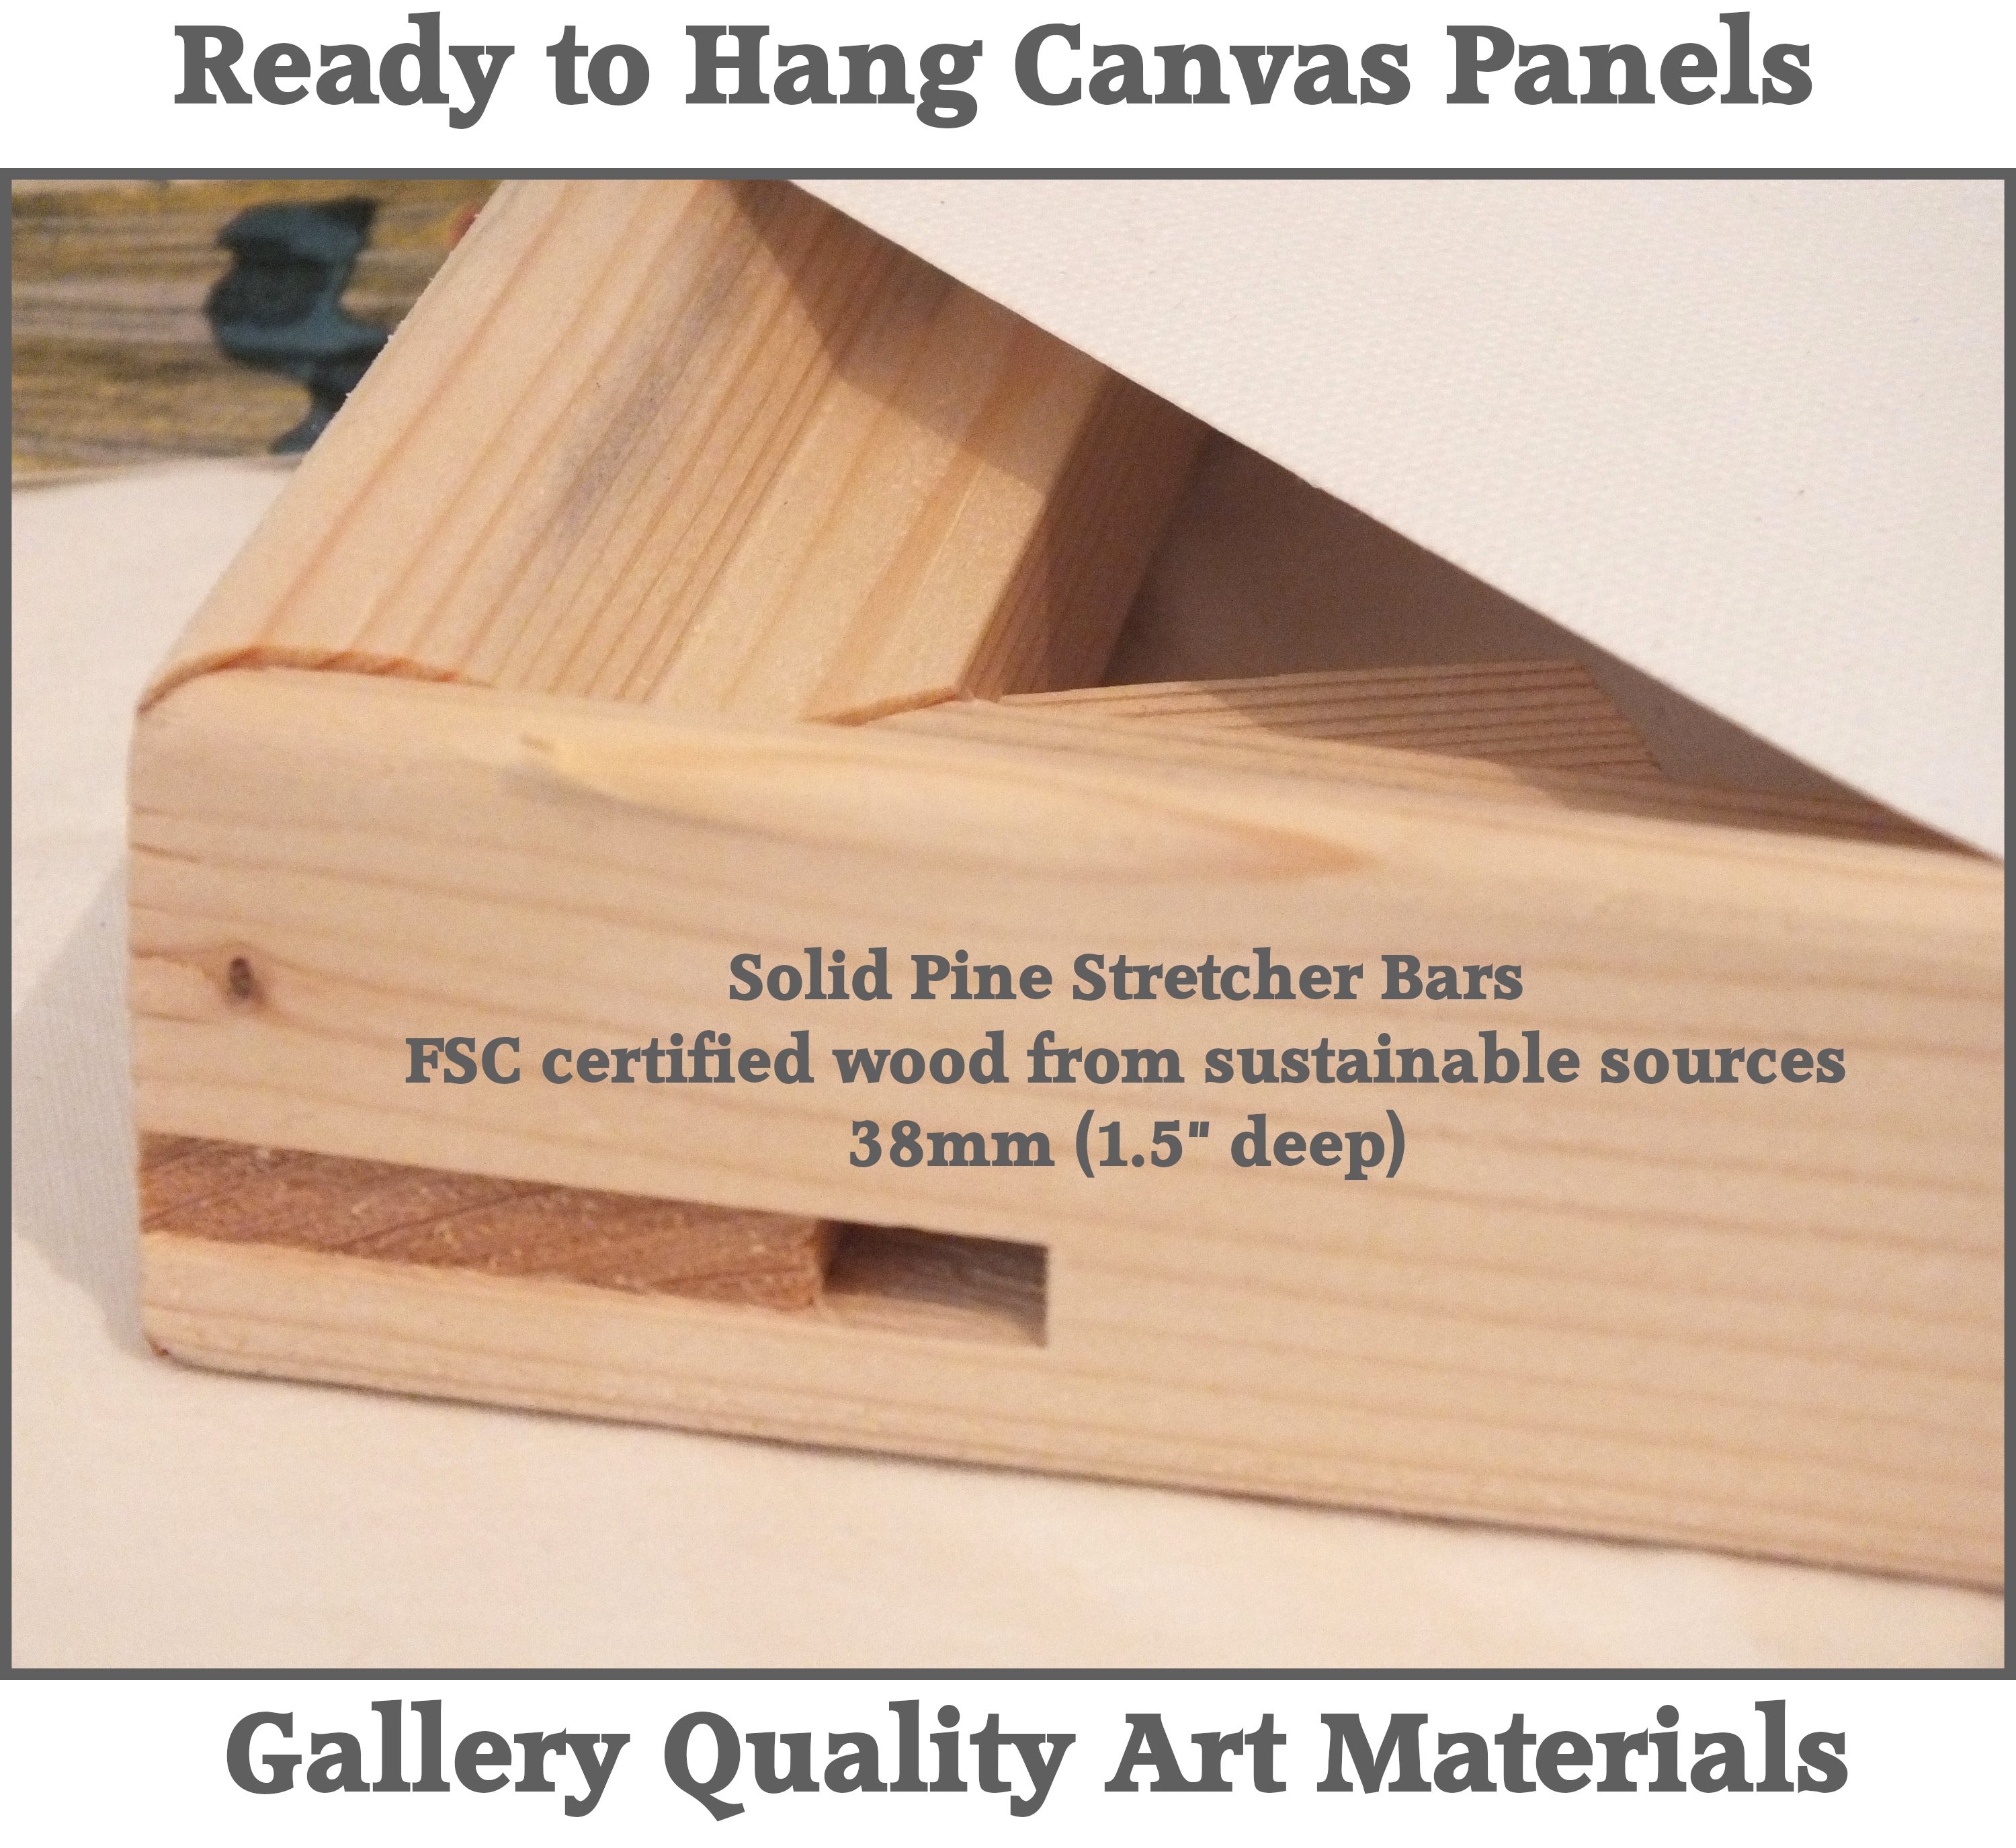 Stretched canvas panels